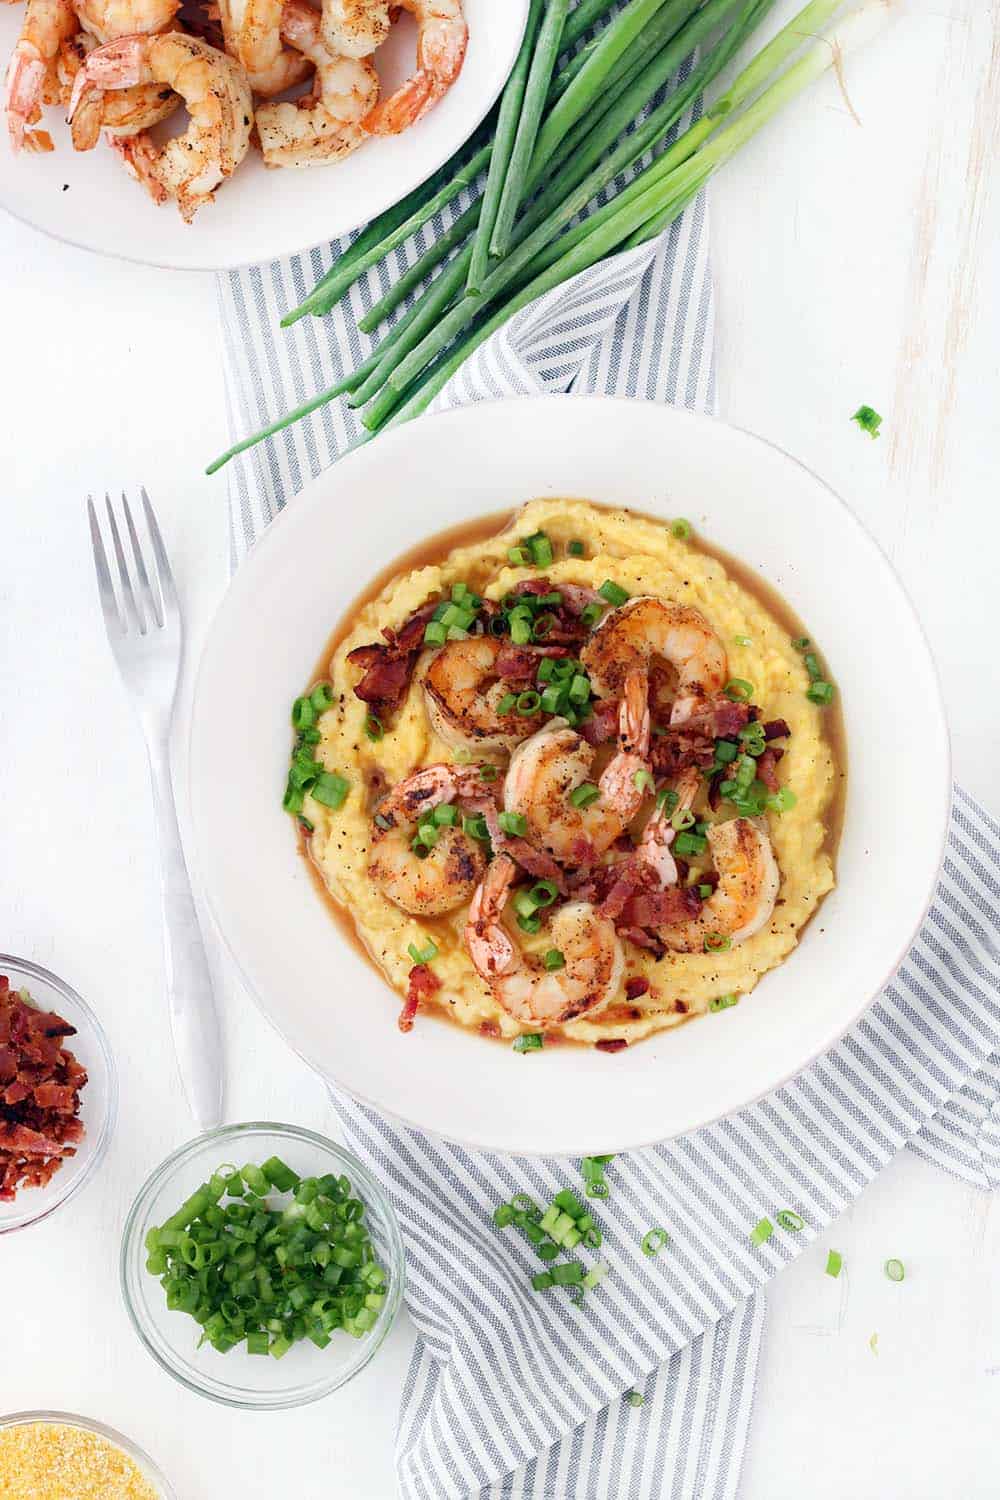 This classic Shrimp and Grits recipe is easy to make and is such delicious Southern comfort food! The cheesy grits are cheap and gluten free, and make an excellent base for the flavorful shrimp and crumbled bacon.